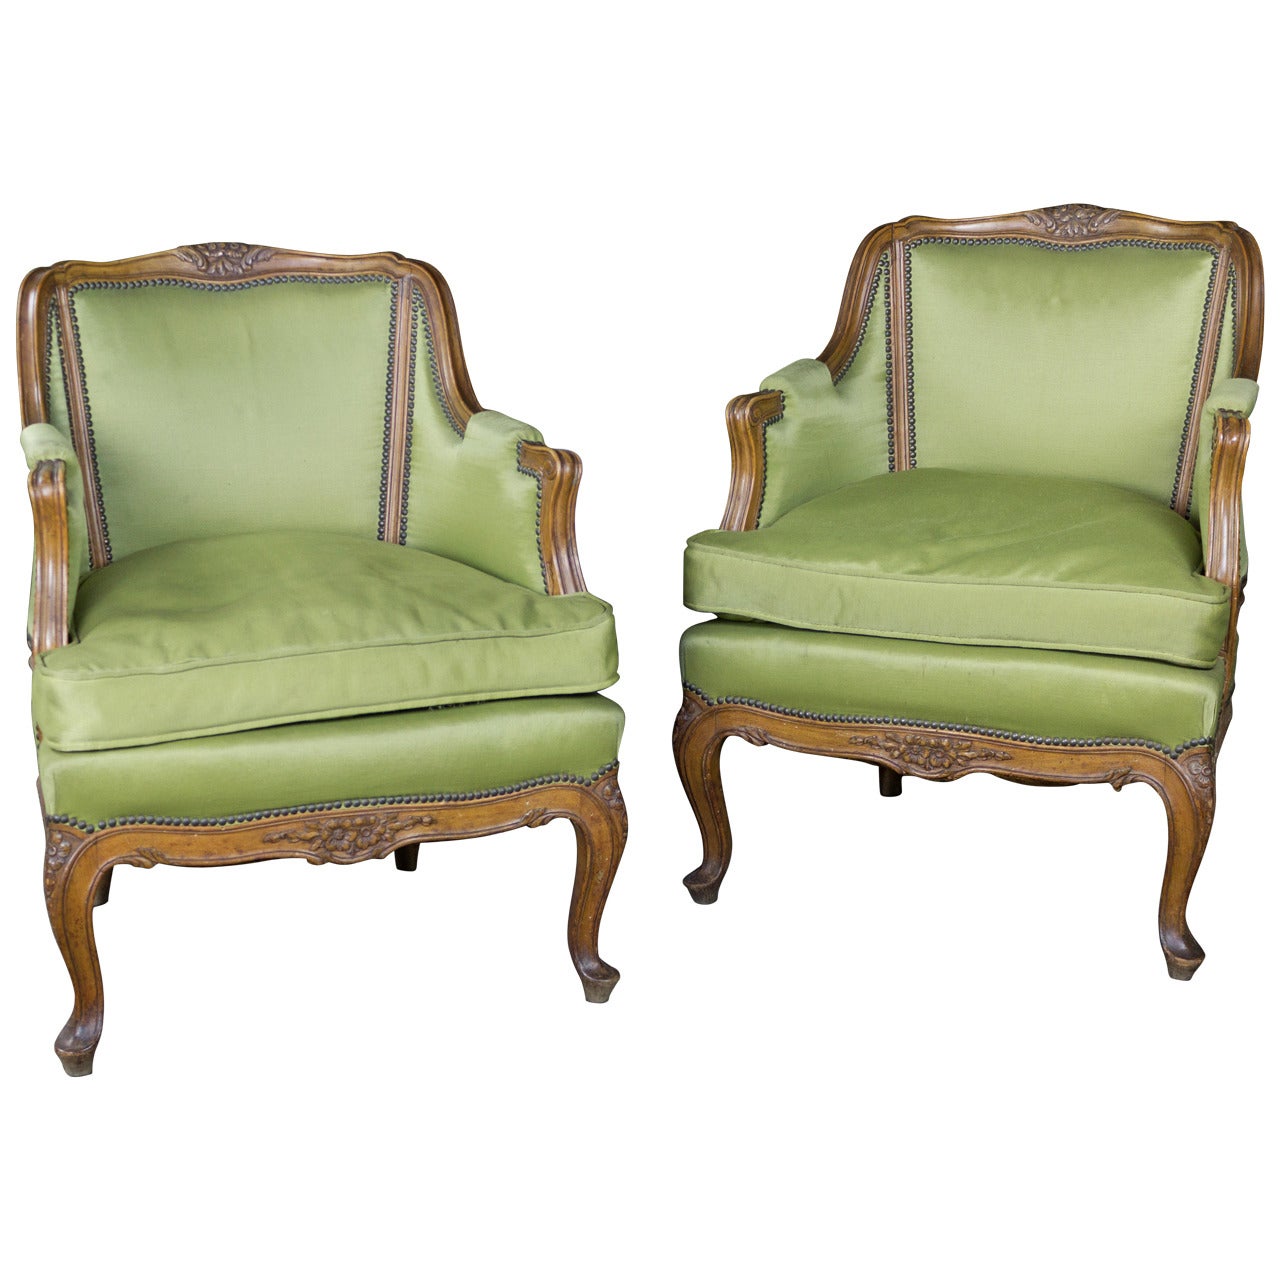 Pair of Louis XV Style Green Armchairs with Exposed Wood Frame